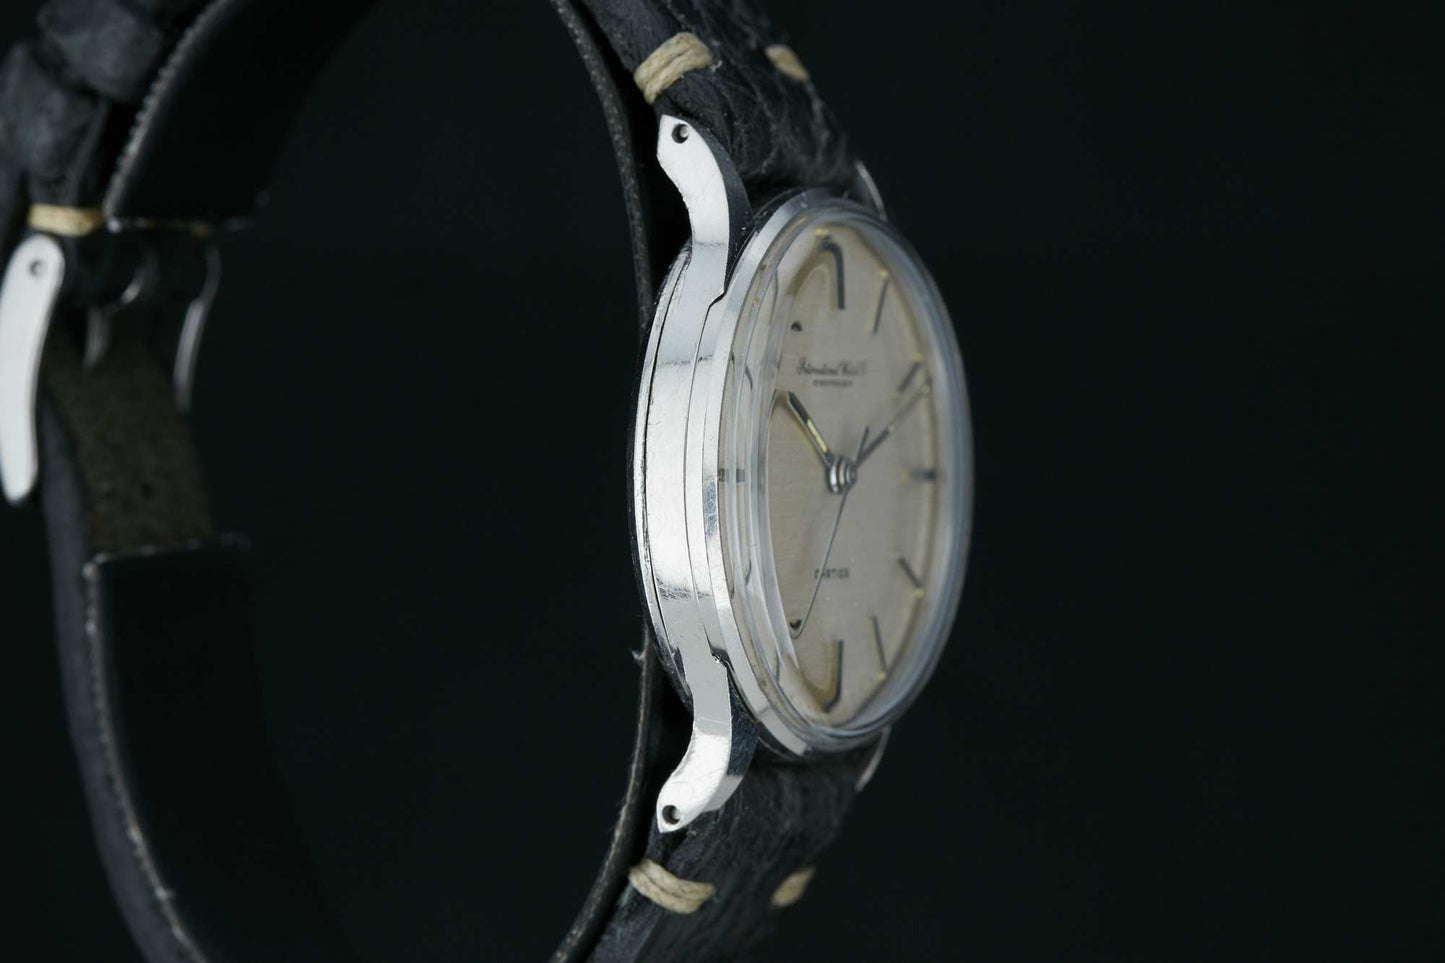 IWC Caliber 89 Signed by Cartier